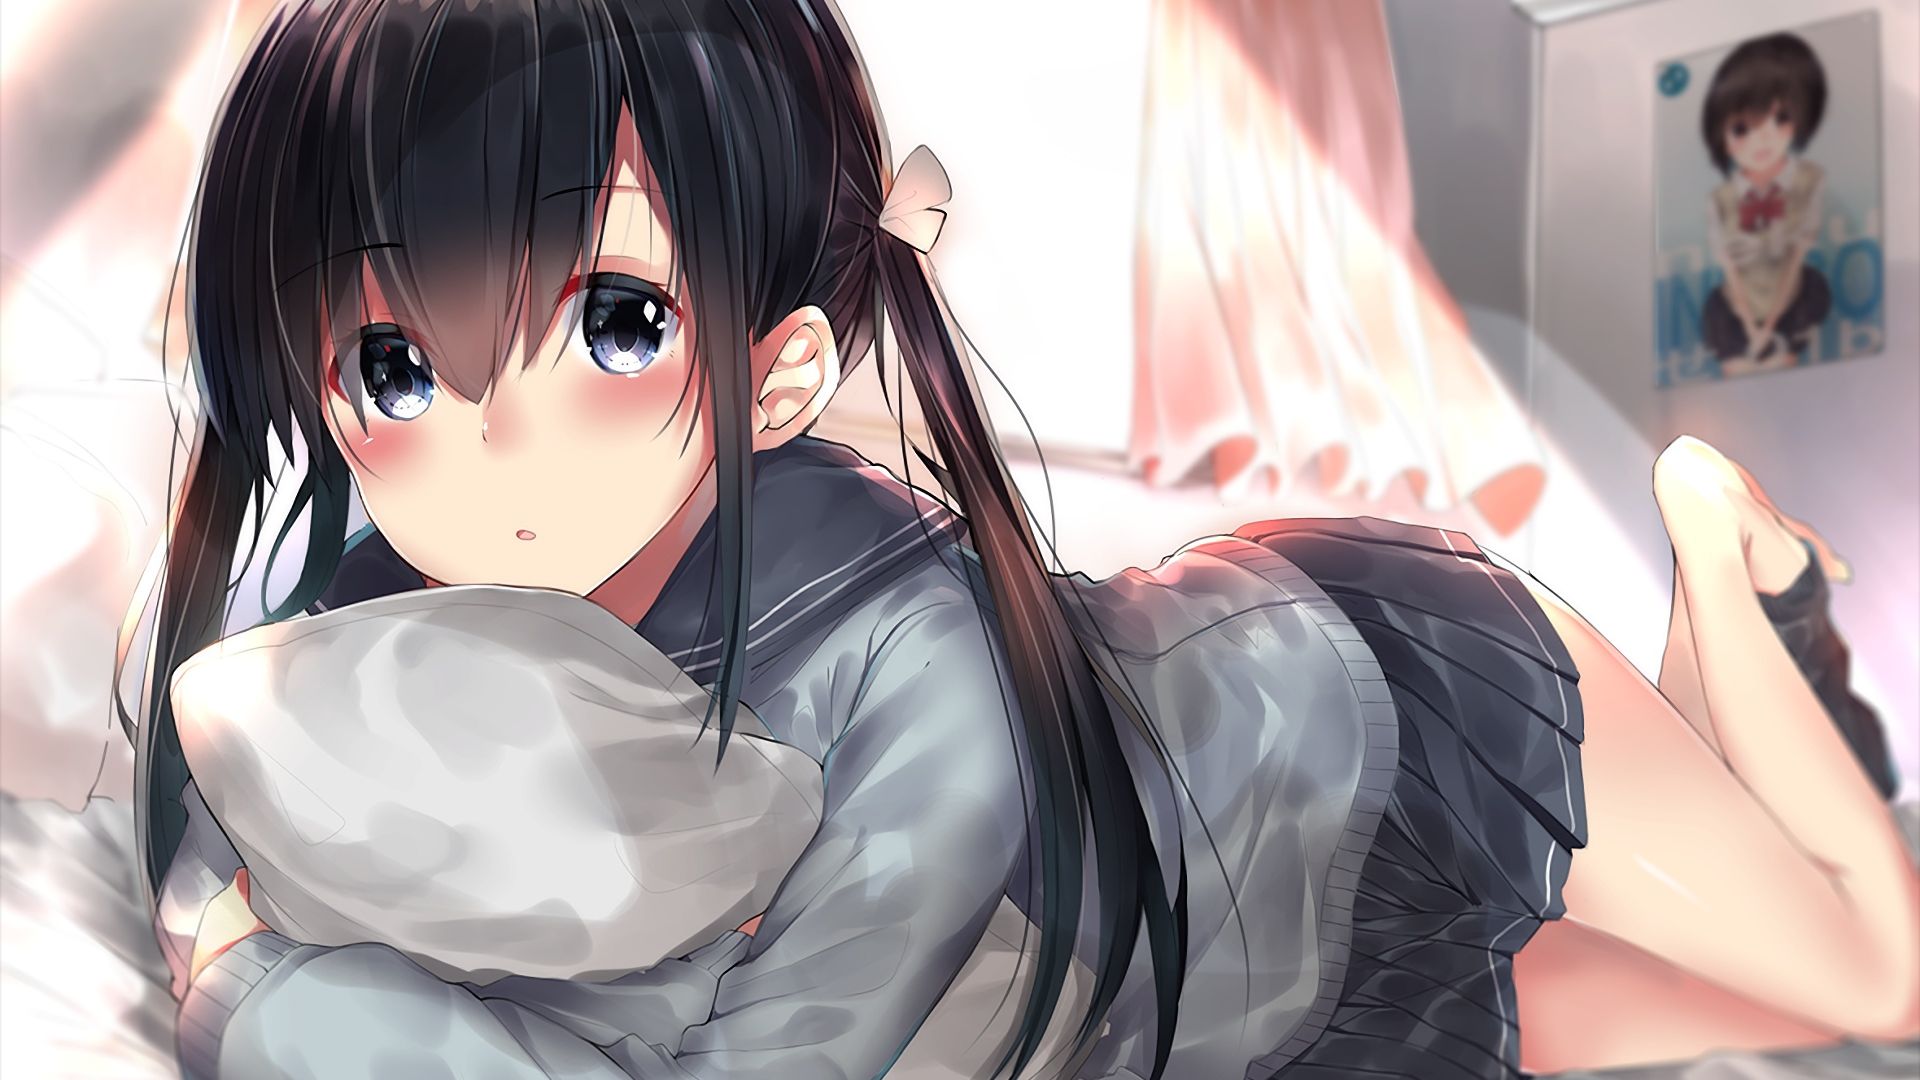 Desktop Wallpaper Lying Down, In Bed, Original, Anime Girl, Hd Image,  Picture, Background, 63fdba